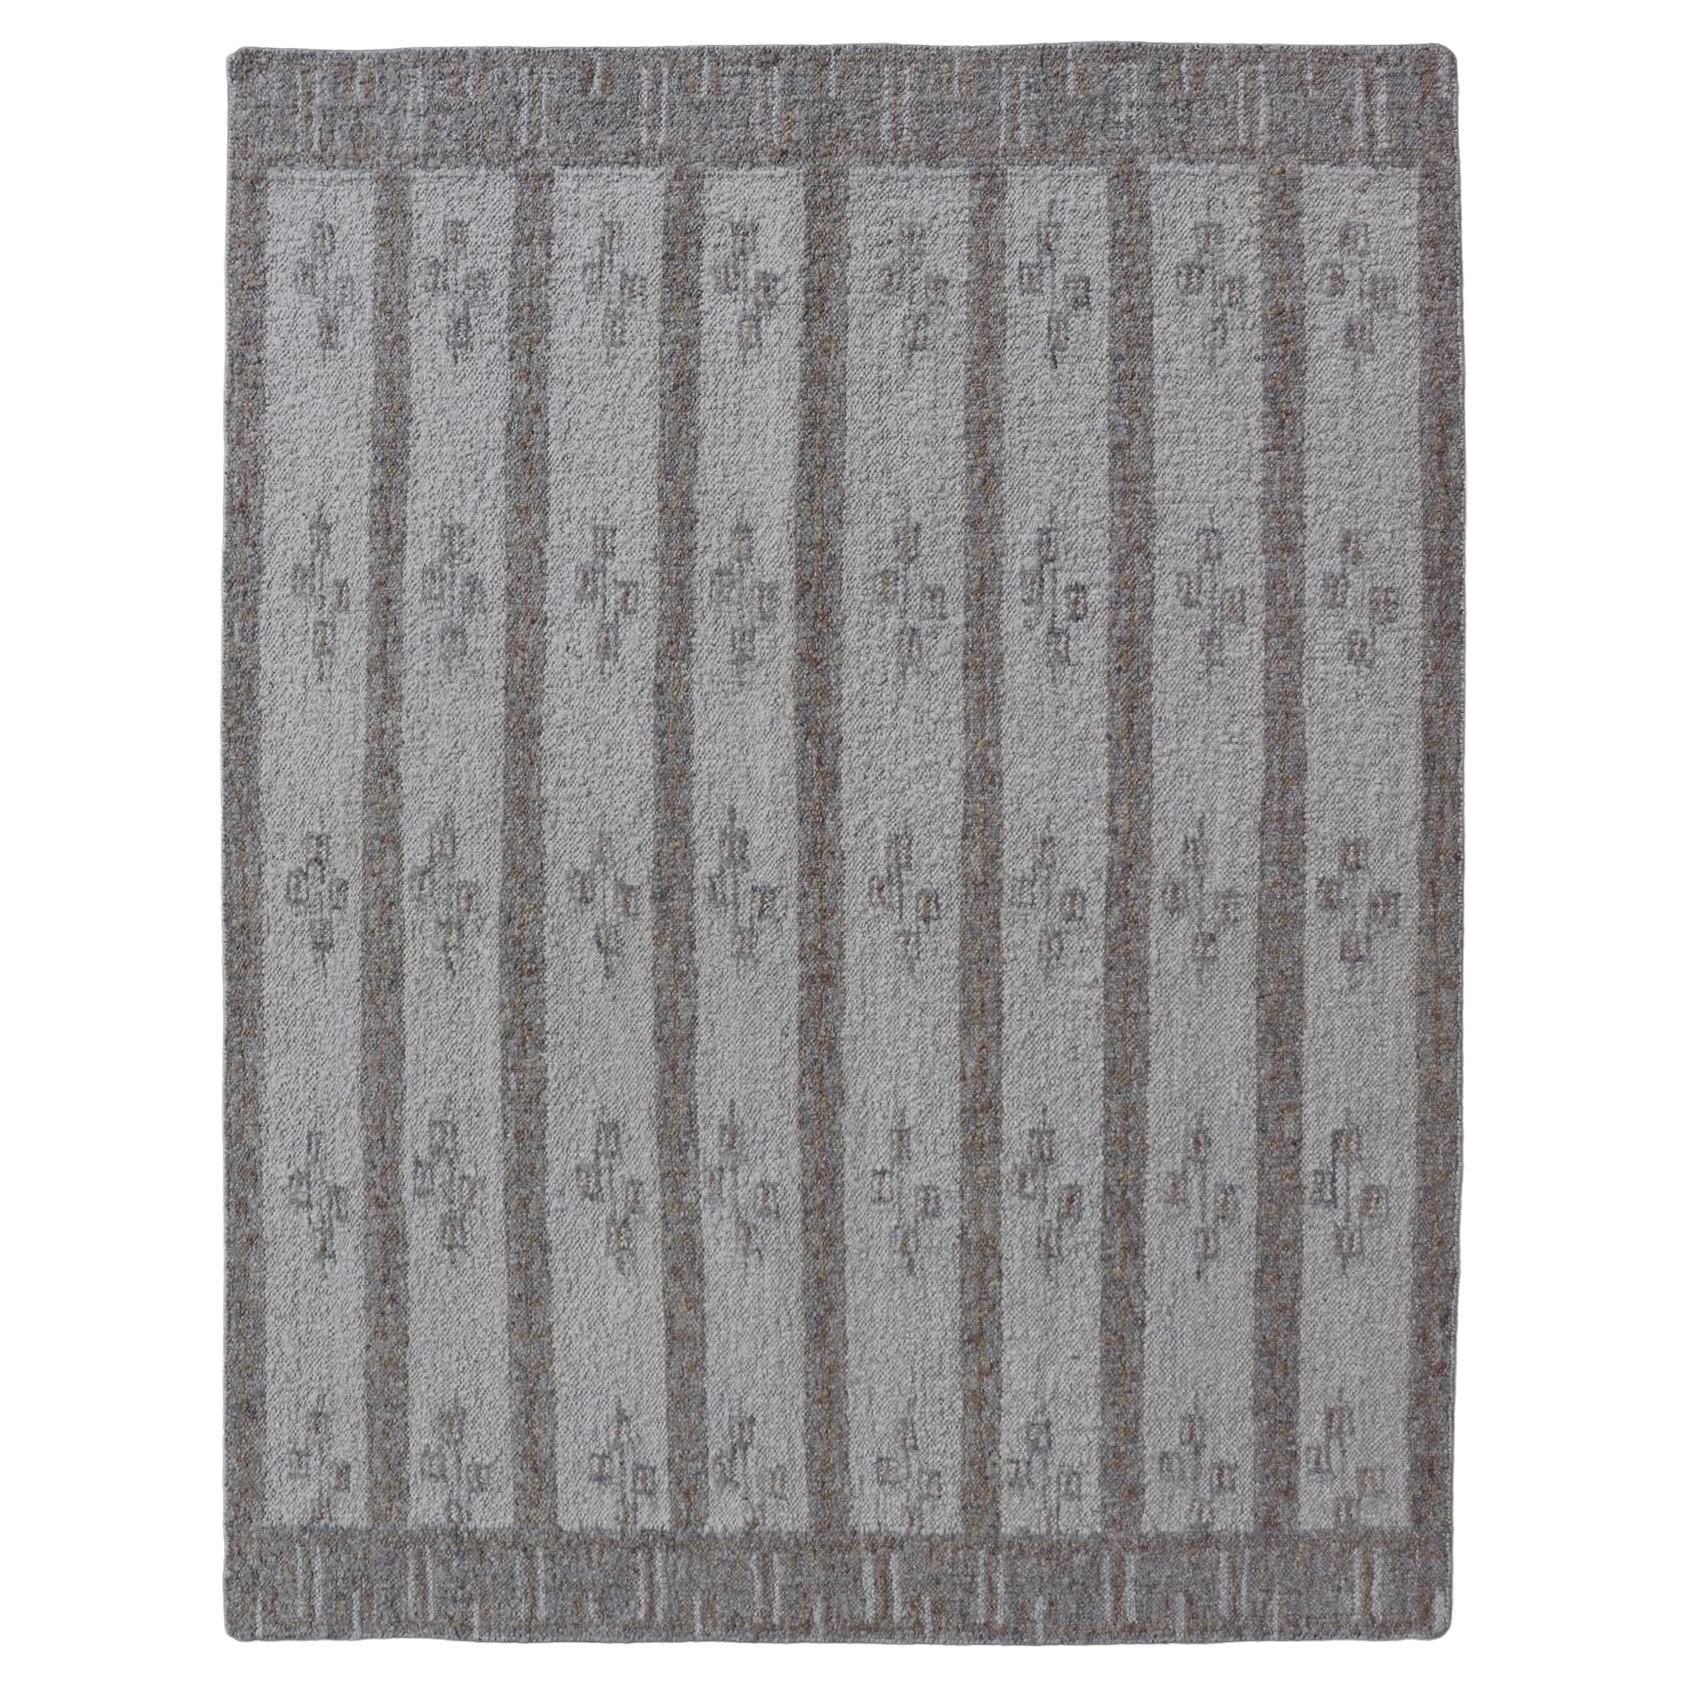 Scandinavian Inspired Design Rug Hand Woven in Light Blue, Tan and Gray Colors For Sale